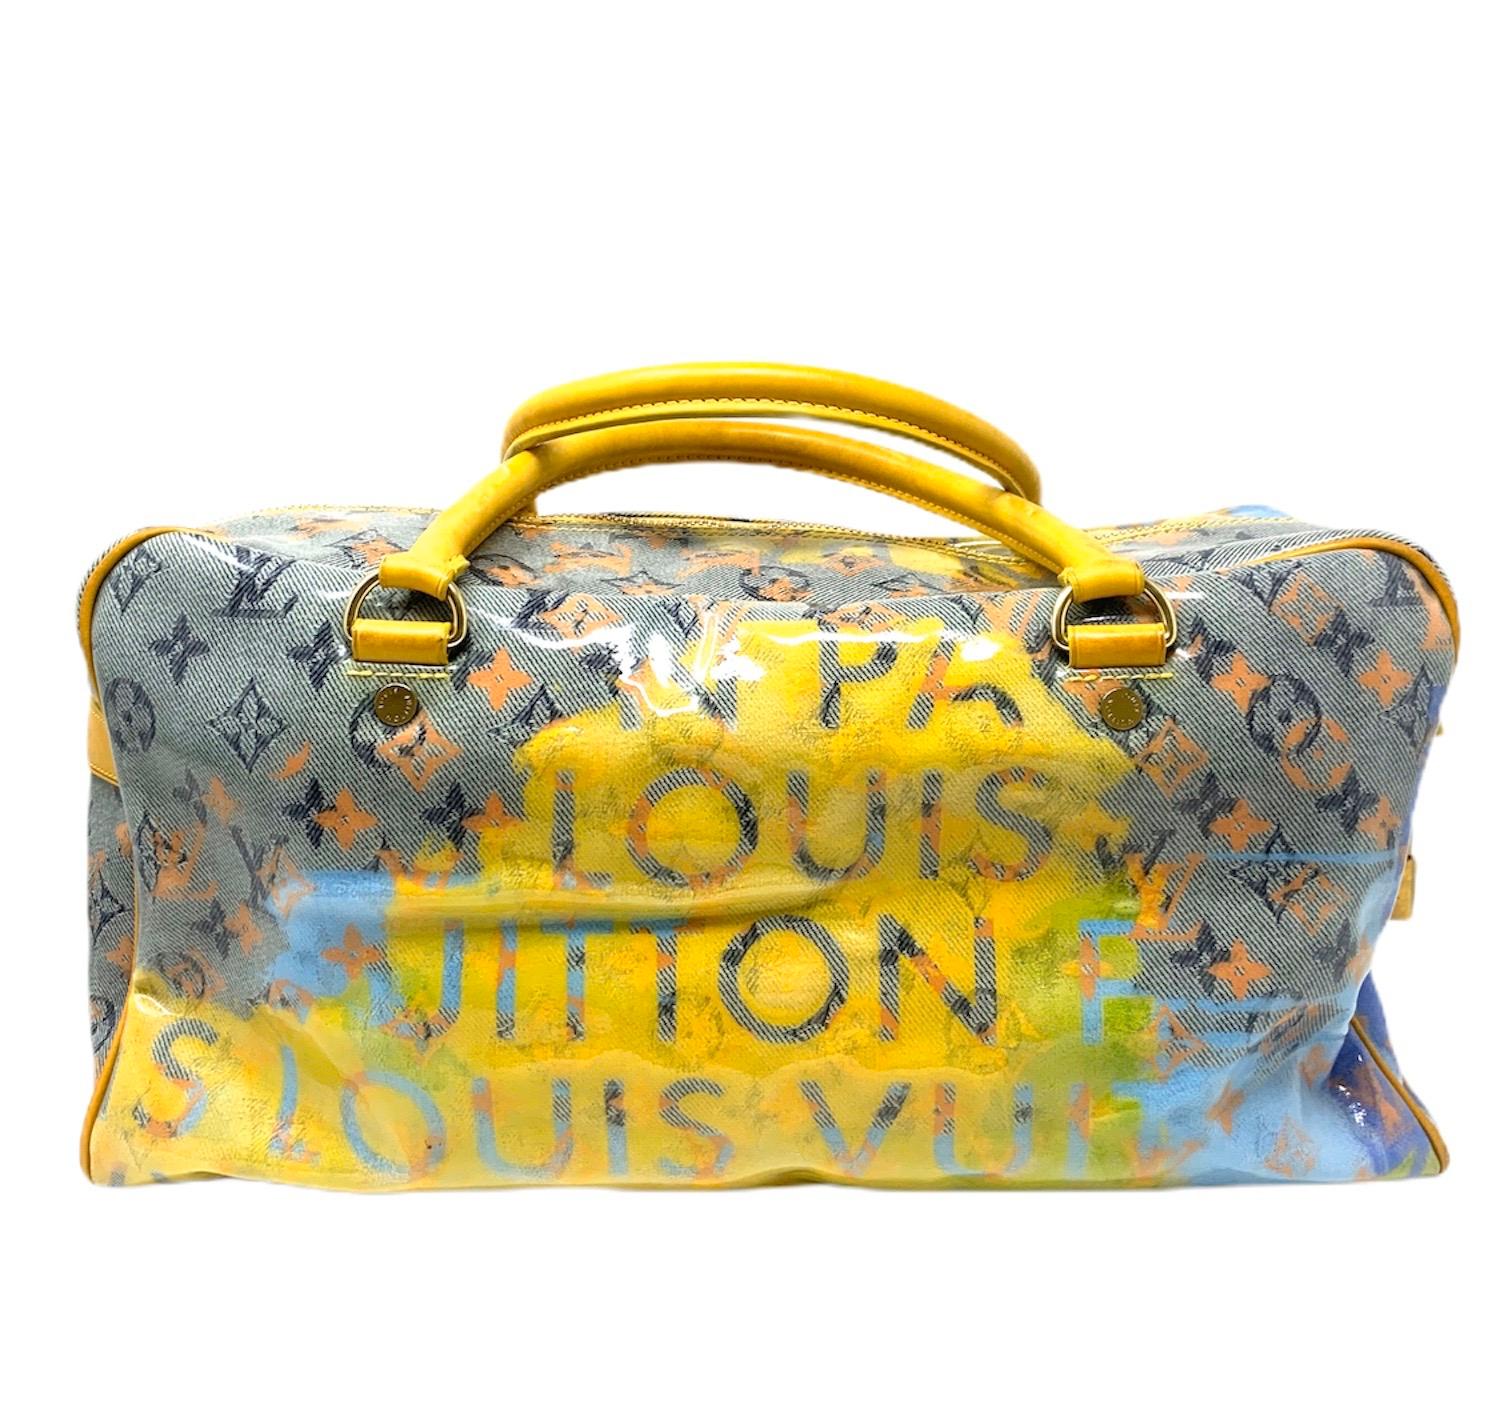 Louis Vuitton by Marc Jacobs and Richard Prince.
Louis Vuitton limited edition Limitées handbag in yellow, blue multicolor monogram canvas and yellow leather.
Limited edition year 2008, good condition complete with internal dust-bag in logoed